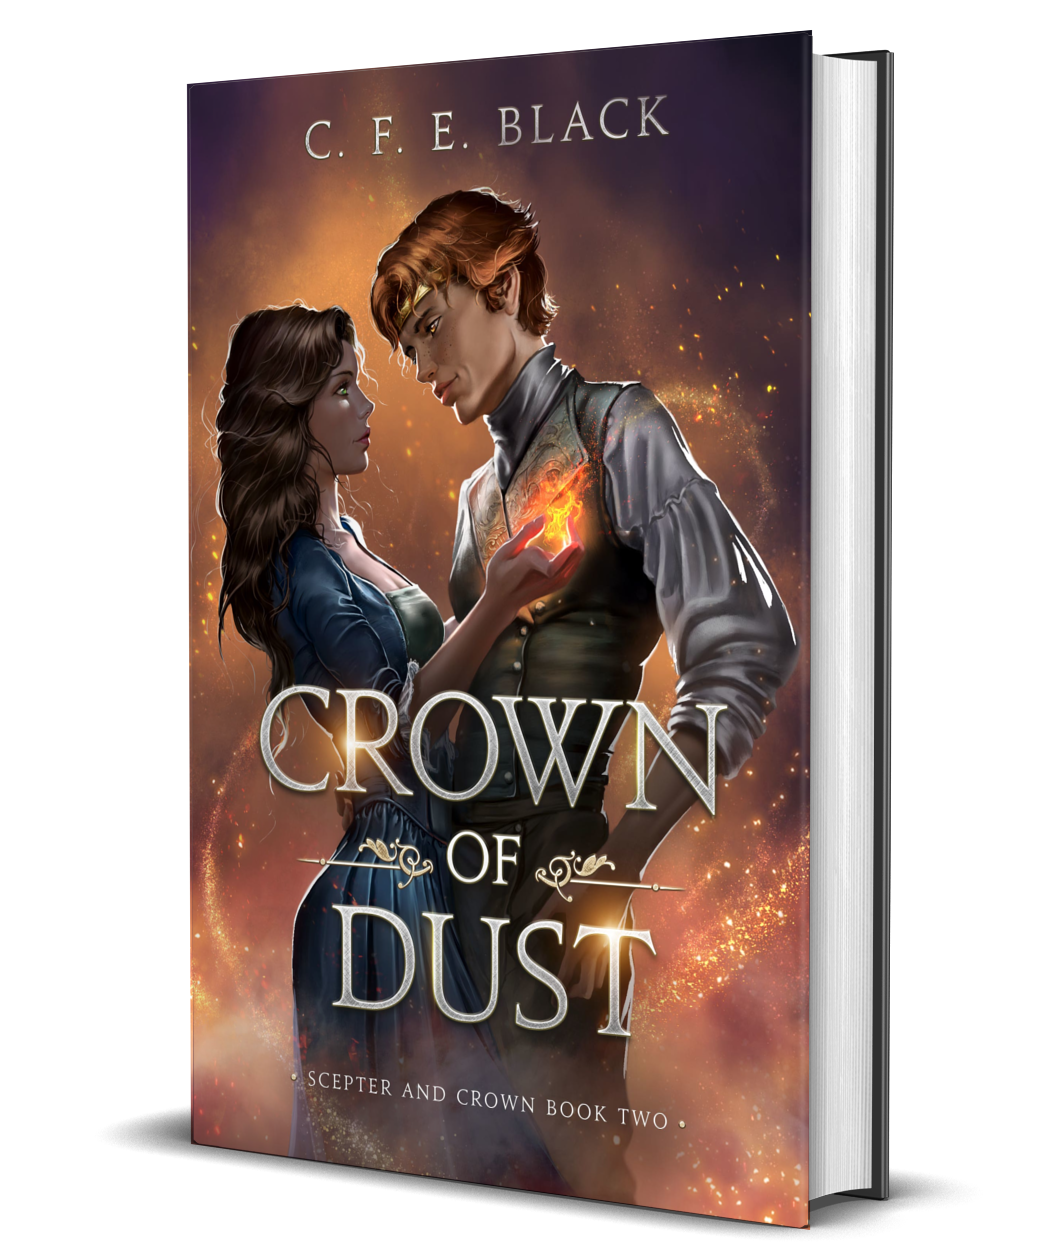 Crown of Dust Scepter and Crown Book 2 hardback cover